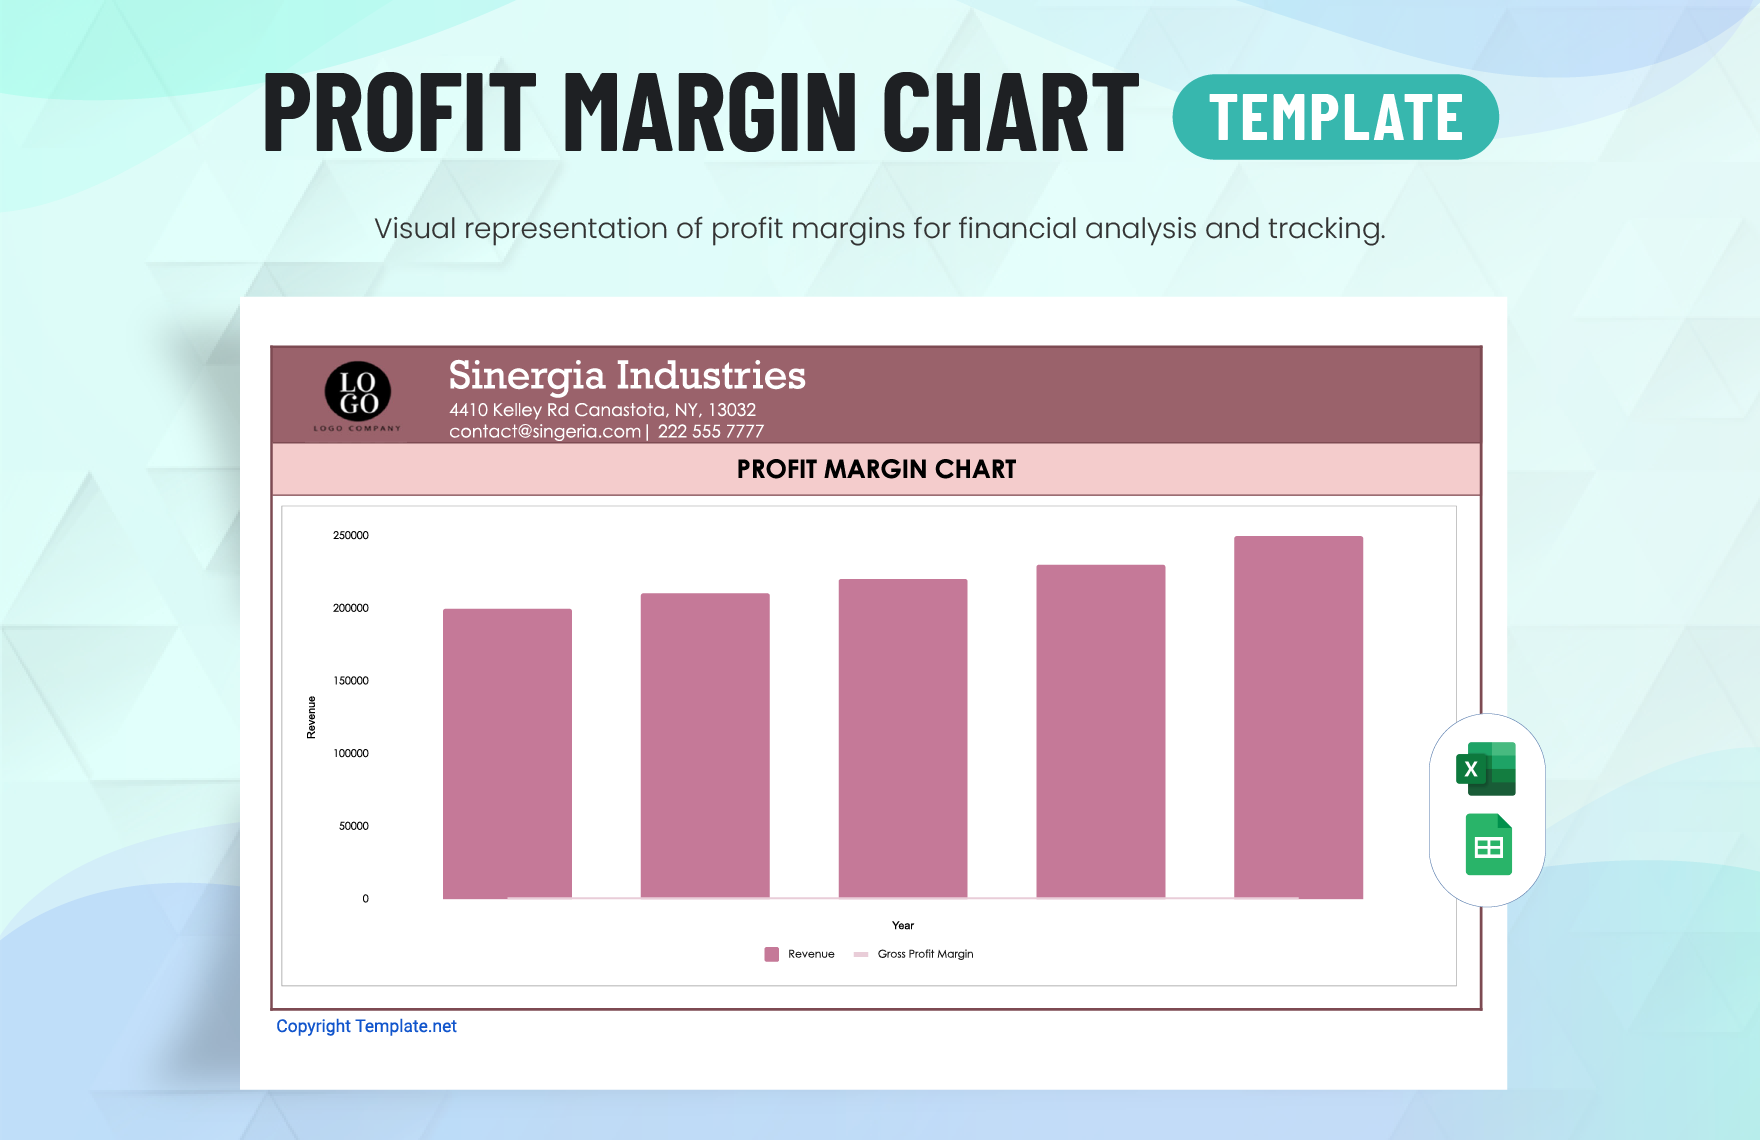 Profit Margin Chart Template in Excel, Google Sheets